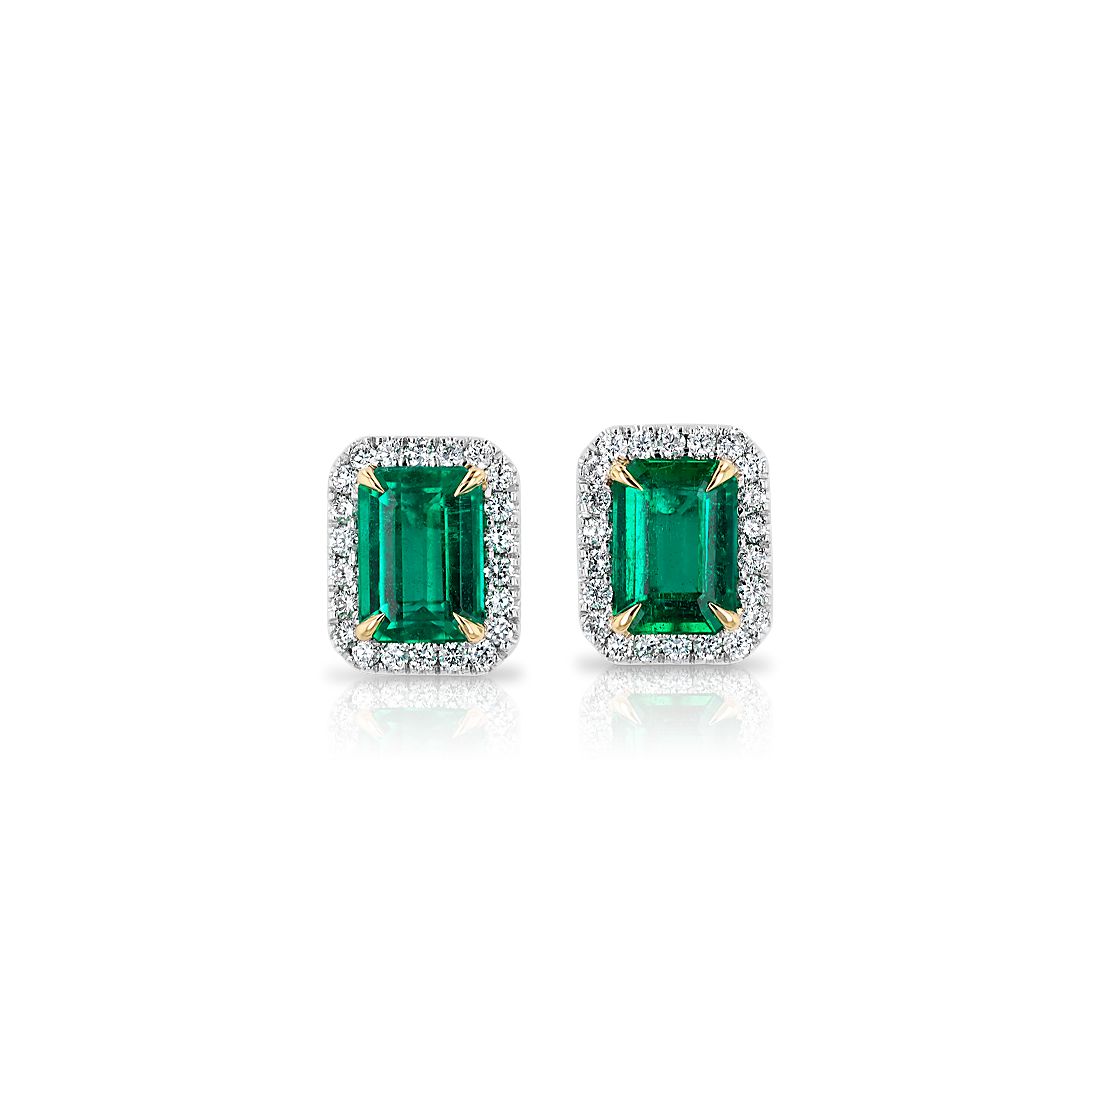 Emerald-Cut Emerald Stud Earrings with Diamond Halo in 14k White Gold with  Yellow Gold Prongs (7x5mm)